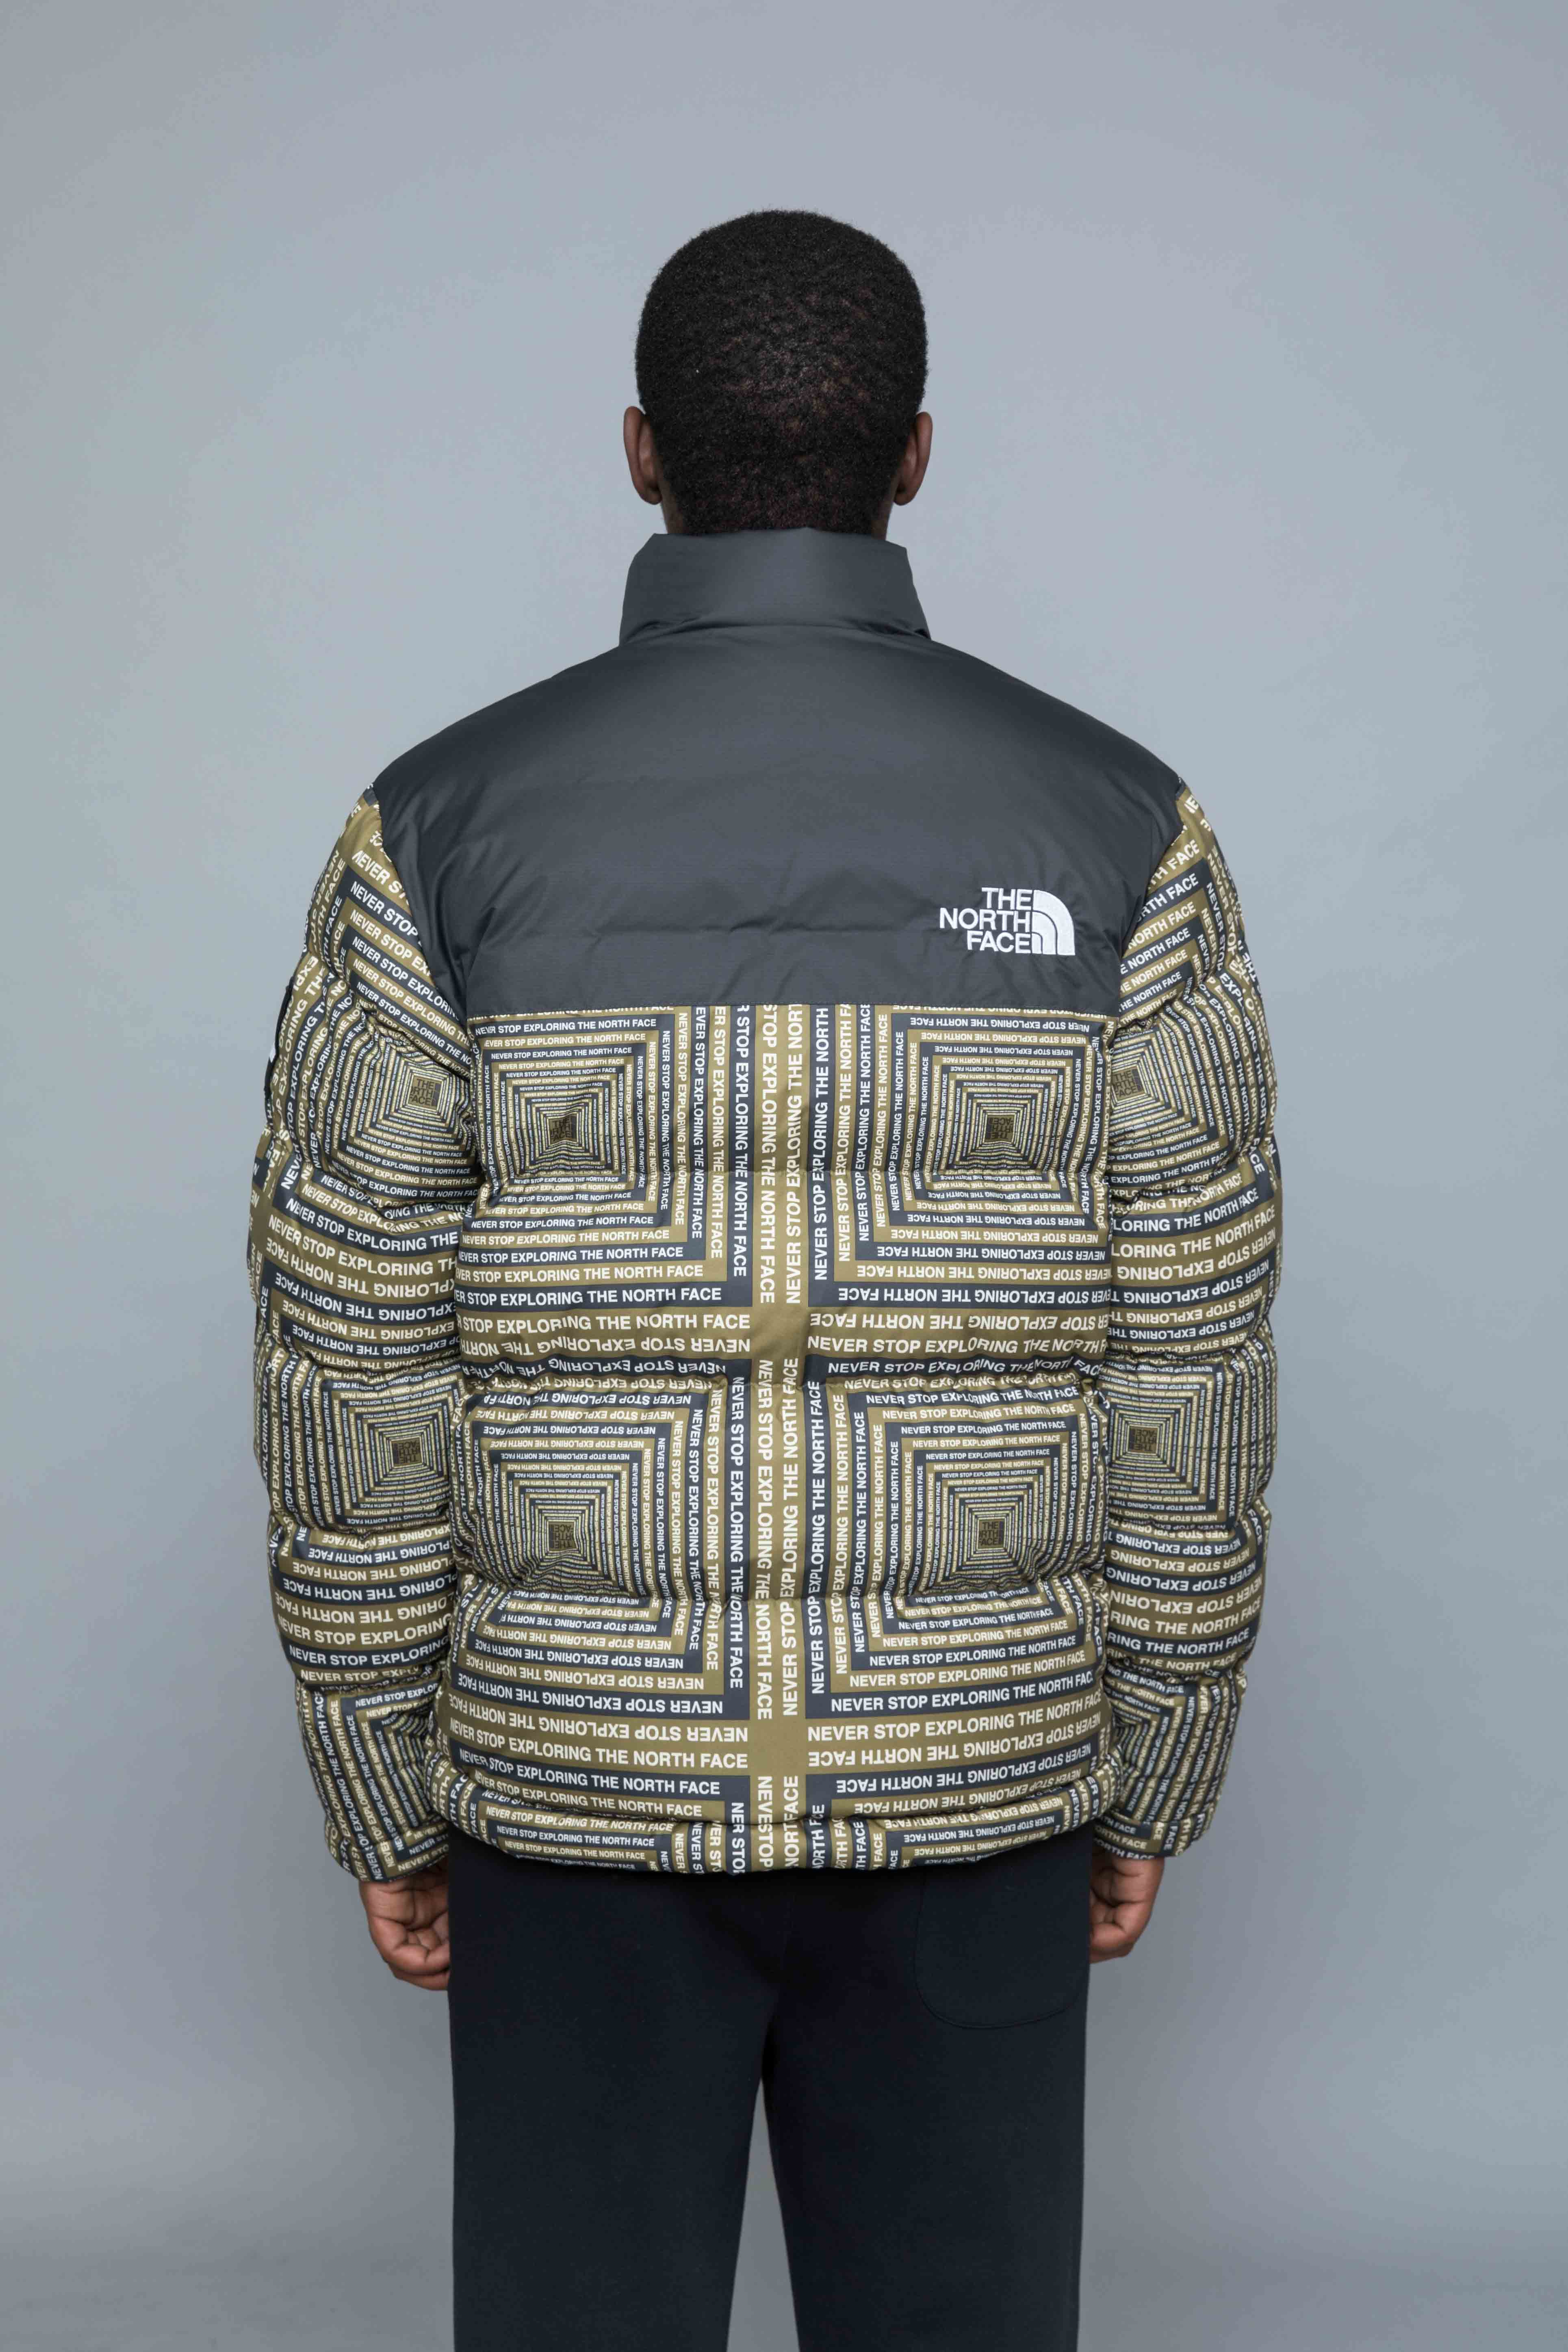 north face never stop exploring jacket